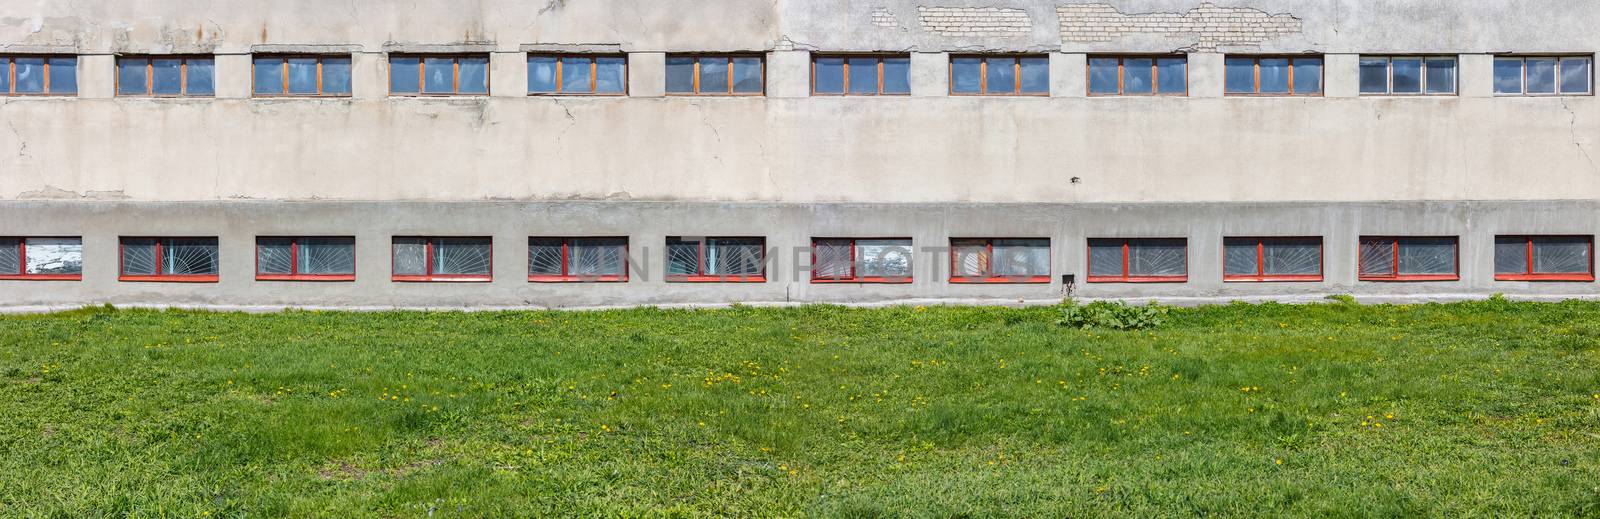 Abstract background, concrete building and grass